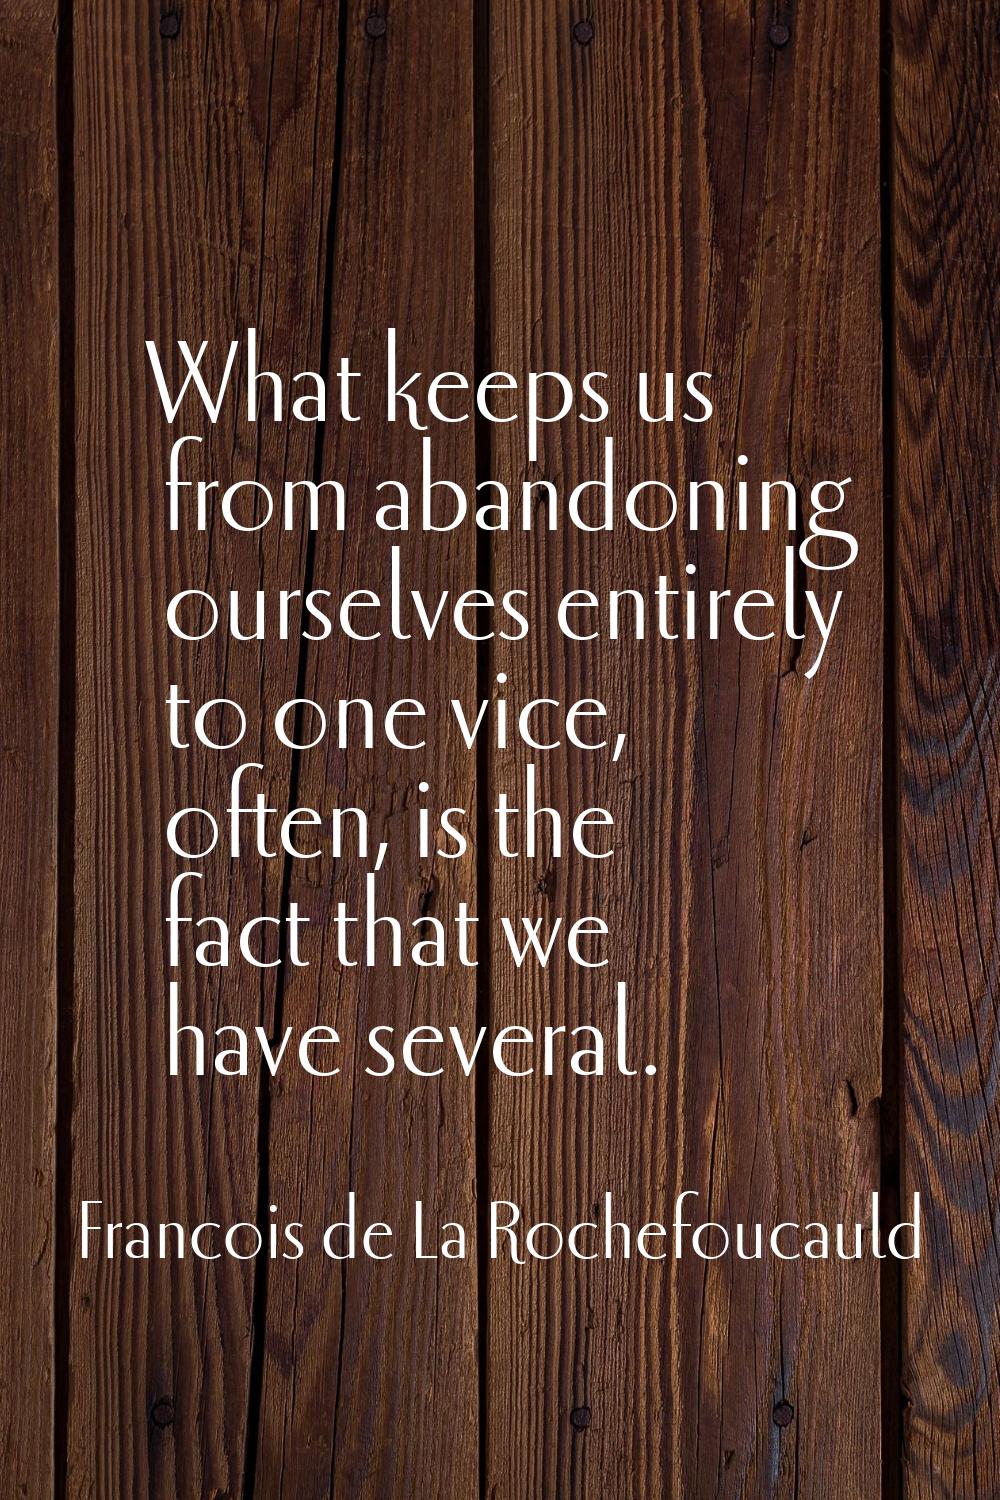 What keeps us from abandoning ourselves entirely to one vice, often, is the fact that we have sever